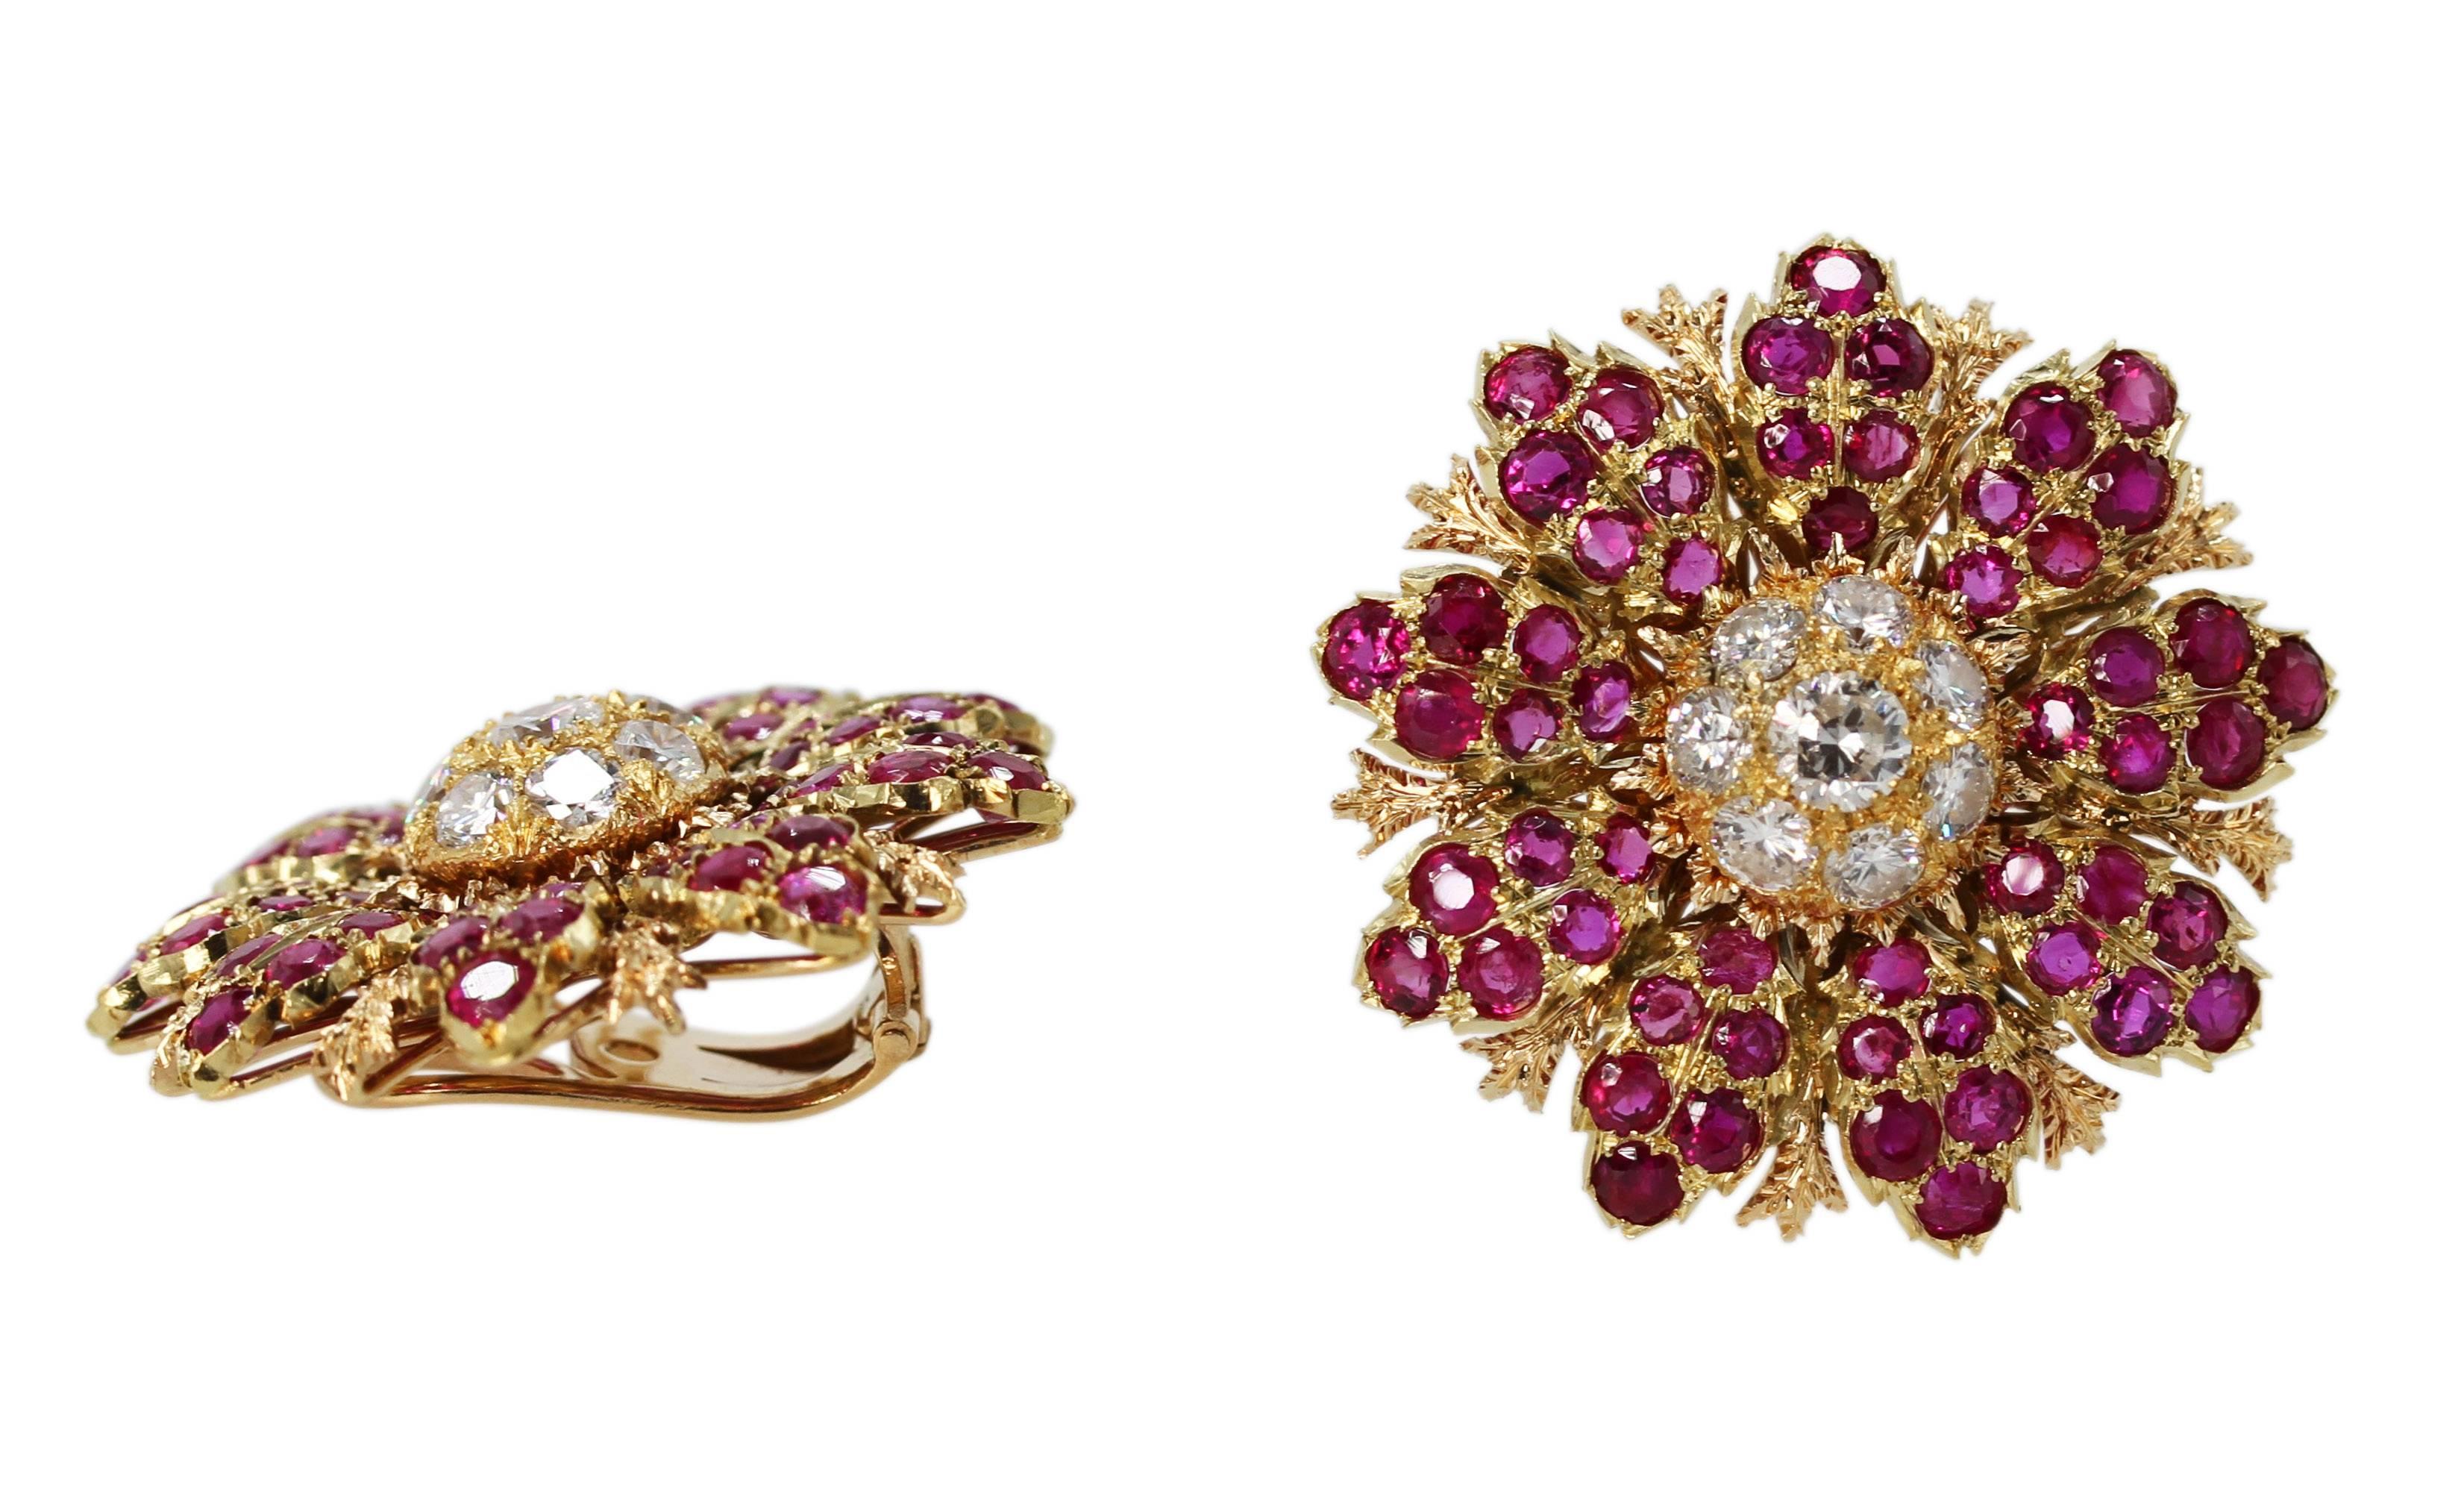 18 Karat Rose Gold, Ruby and Diamond Earrings by Buccellati, circa 1940
• Signed Buccellati Italy 750
• 16 round diamonds approximately 2.75 carats
• 108 round rubies approximately 8.00 carats
• 1 1/4 inches round, gross weight 28.8 grams